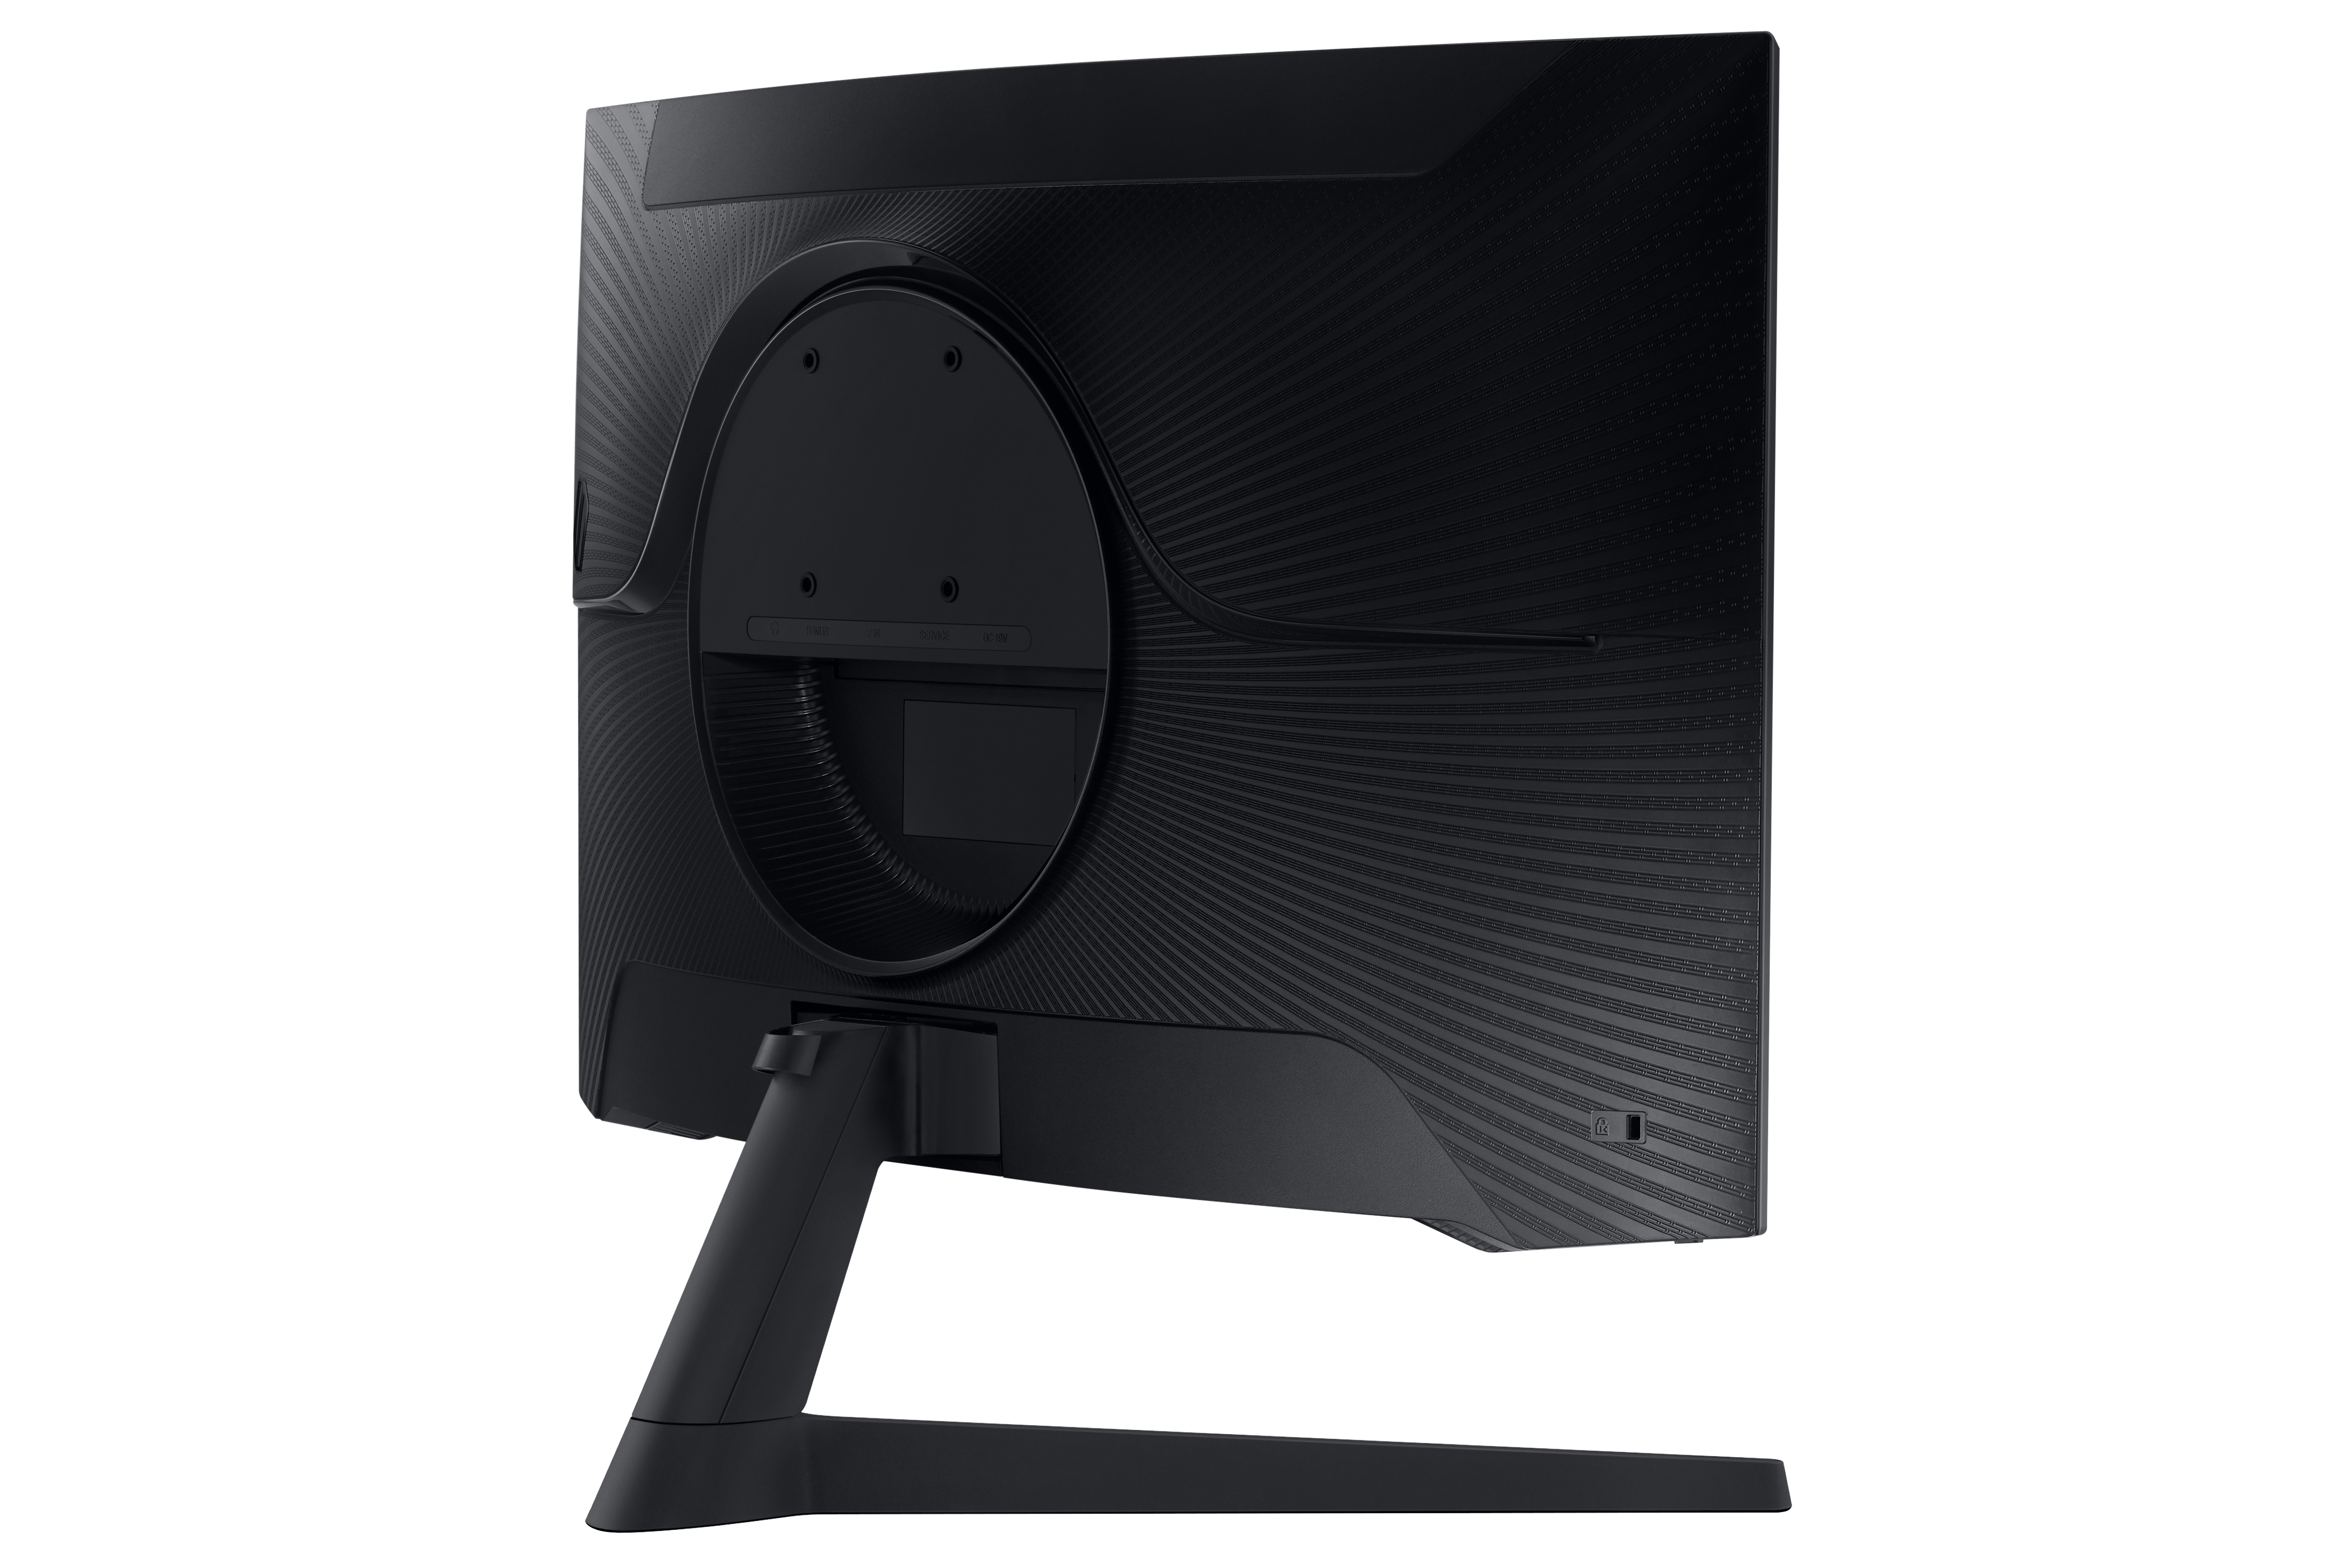 Samsung updates Odyssey G5 gaming monitor with a 32-inch panel - SamMobile